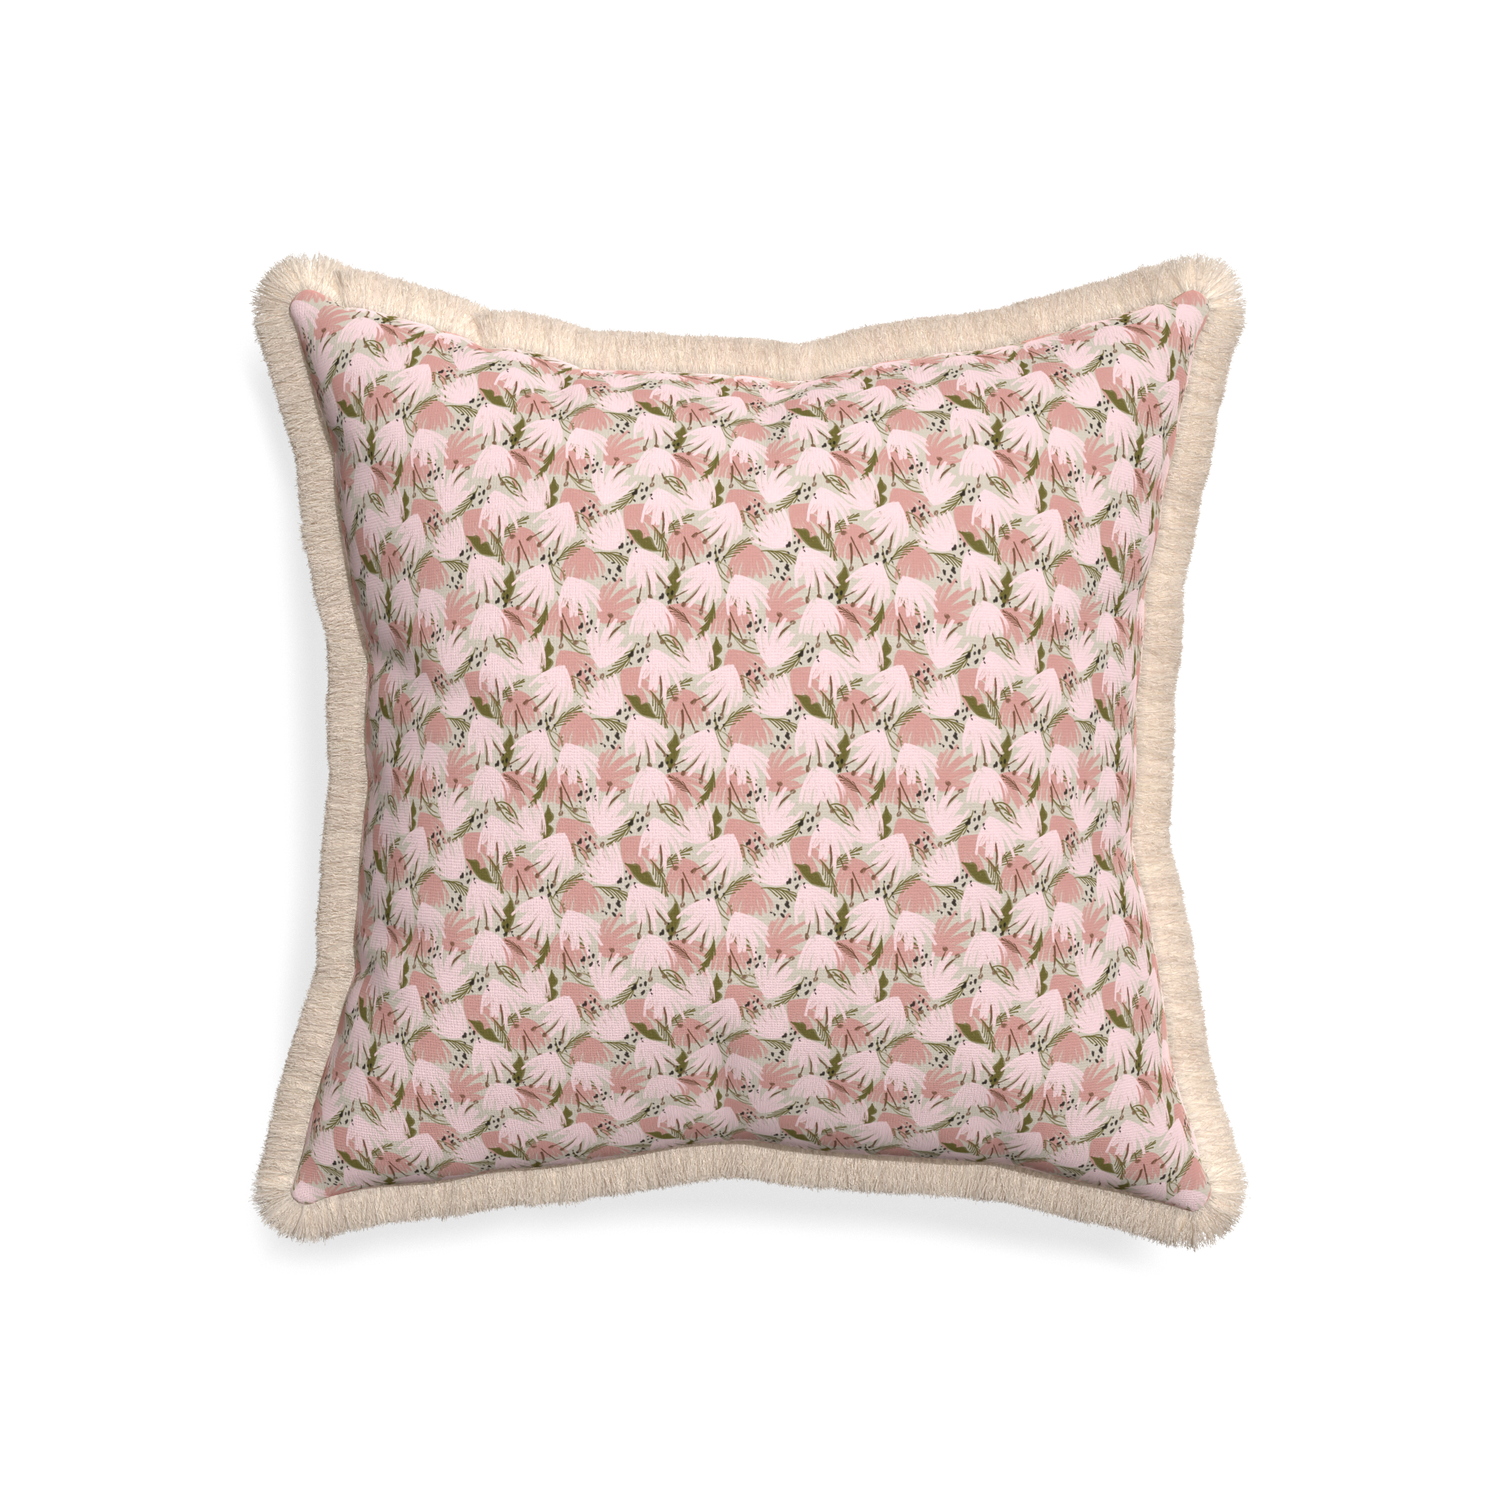 20-square eden pink custom pink floralpillow with cream fringe on white background